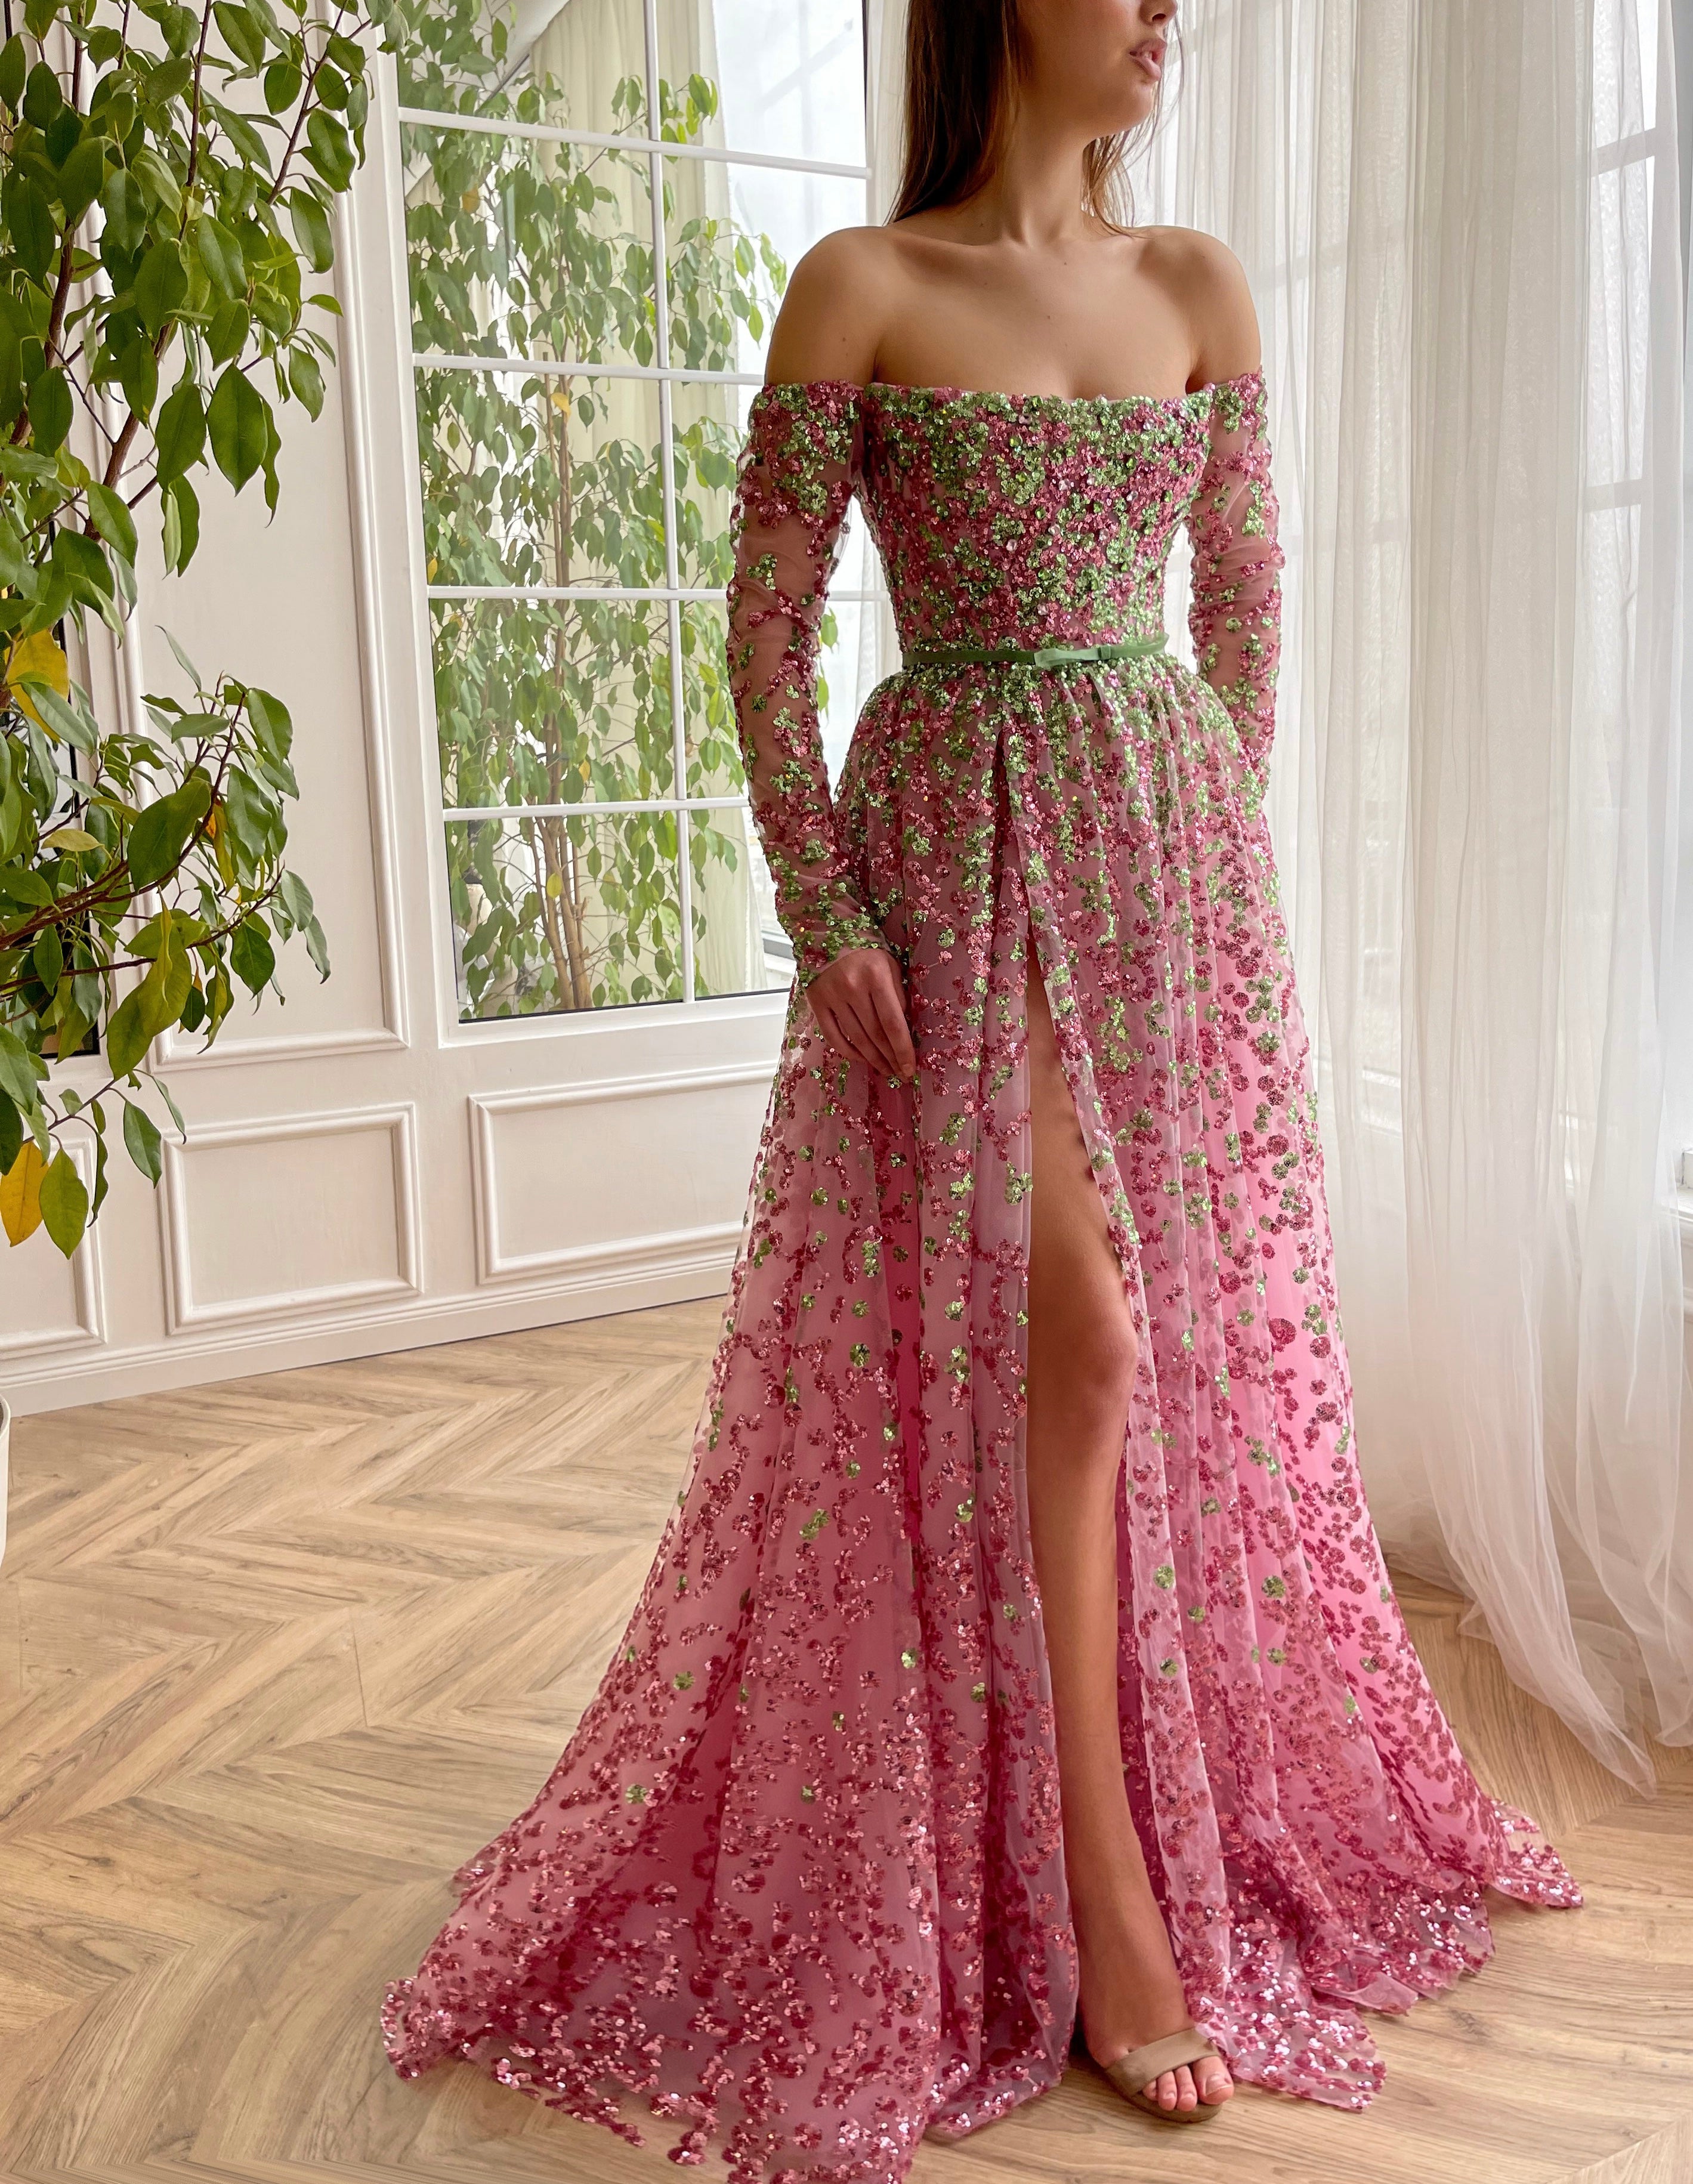 Colourful Dreams Collection Of Gala Dresses - Papilio Boutique | Classy  evening gowns, Evening gowns elegant, Gowns of elegance